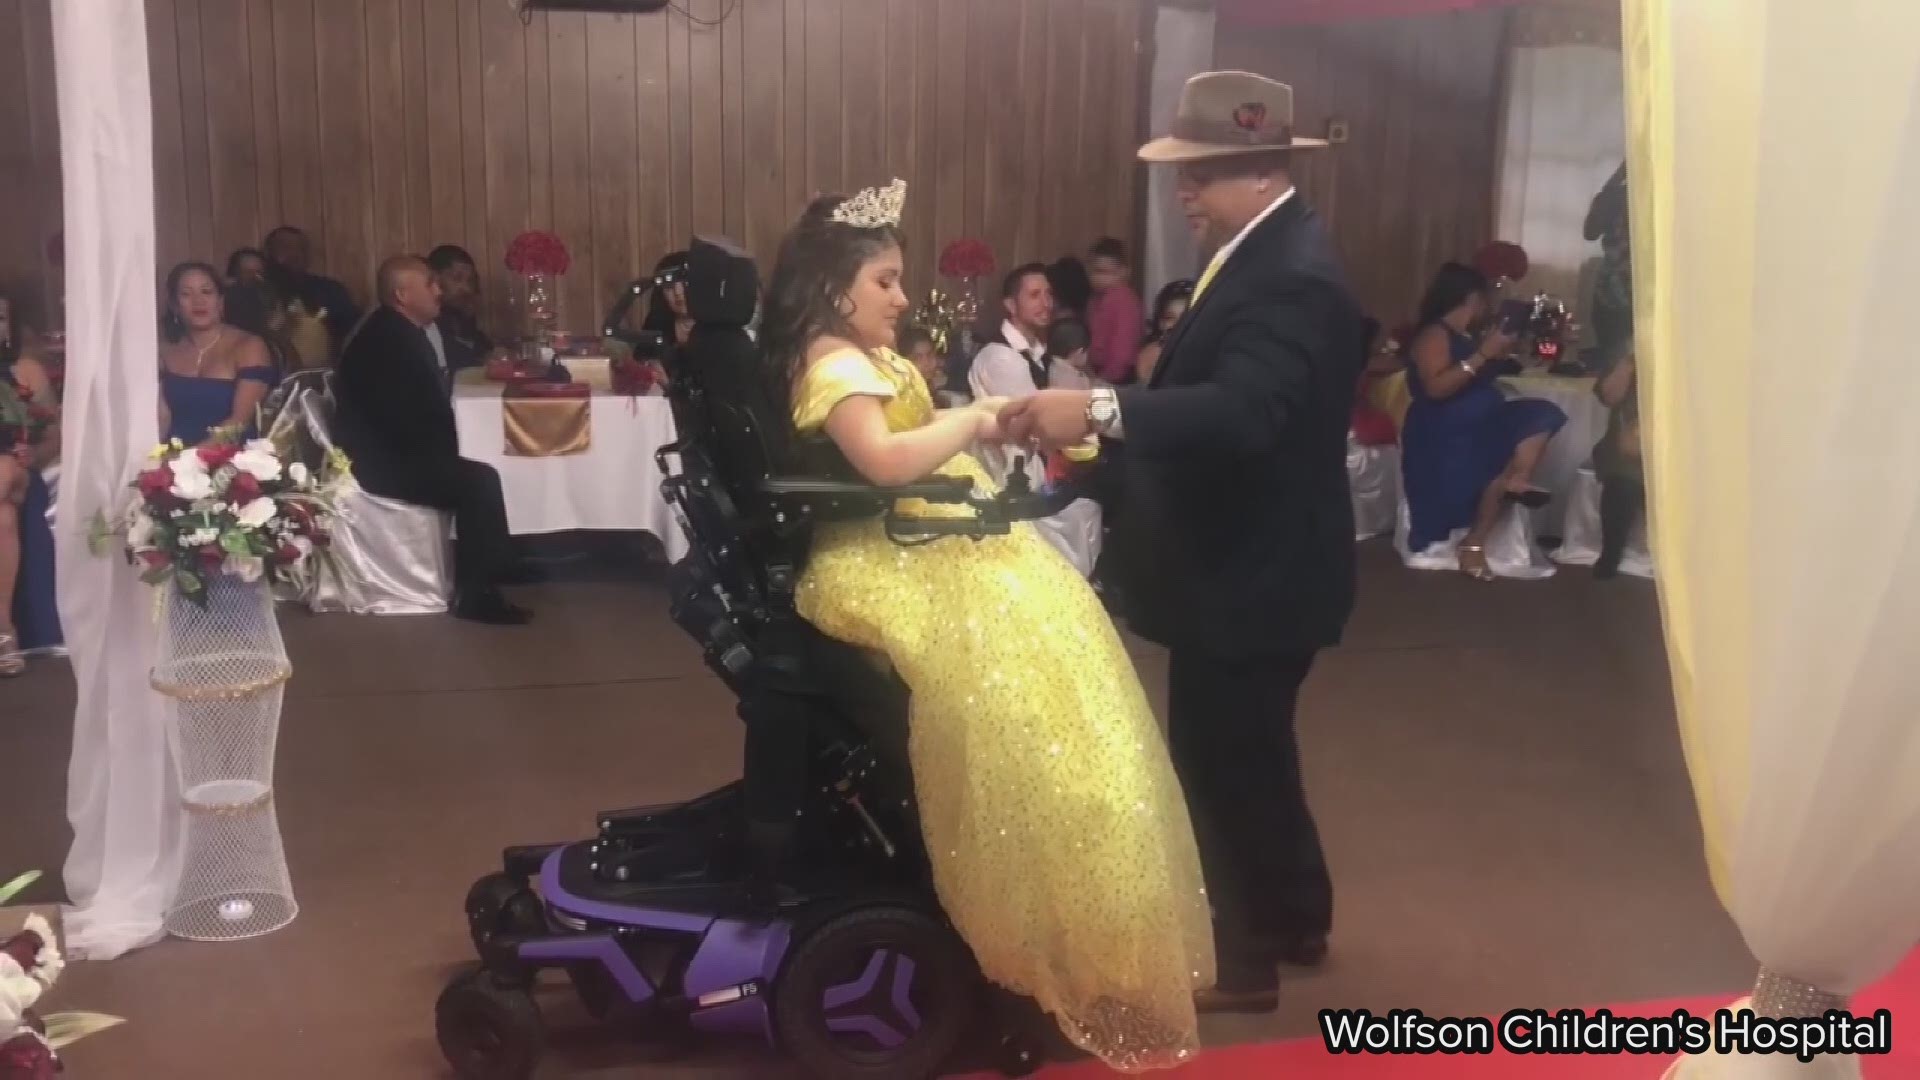 Yanira Guzaman wore a bright yellow dress and crown as she stood for the first time and danced with her father at her quinceañera.

The 15-year-old has spina bifida, but during her "Beauty and the Beast" themed party, she was able to stand up and dance thanks to a new power chair and physical therapy.